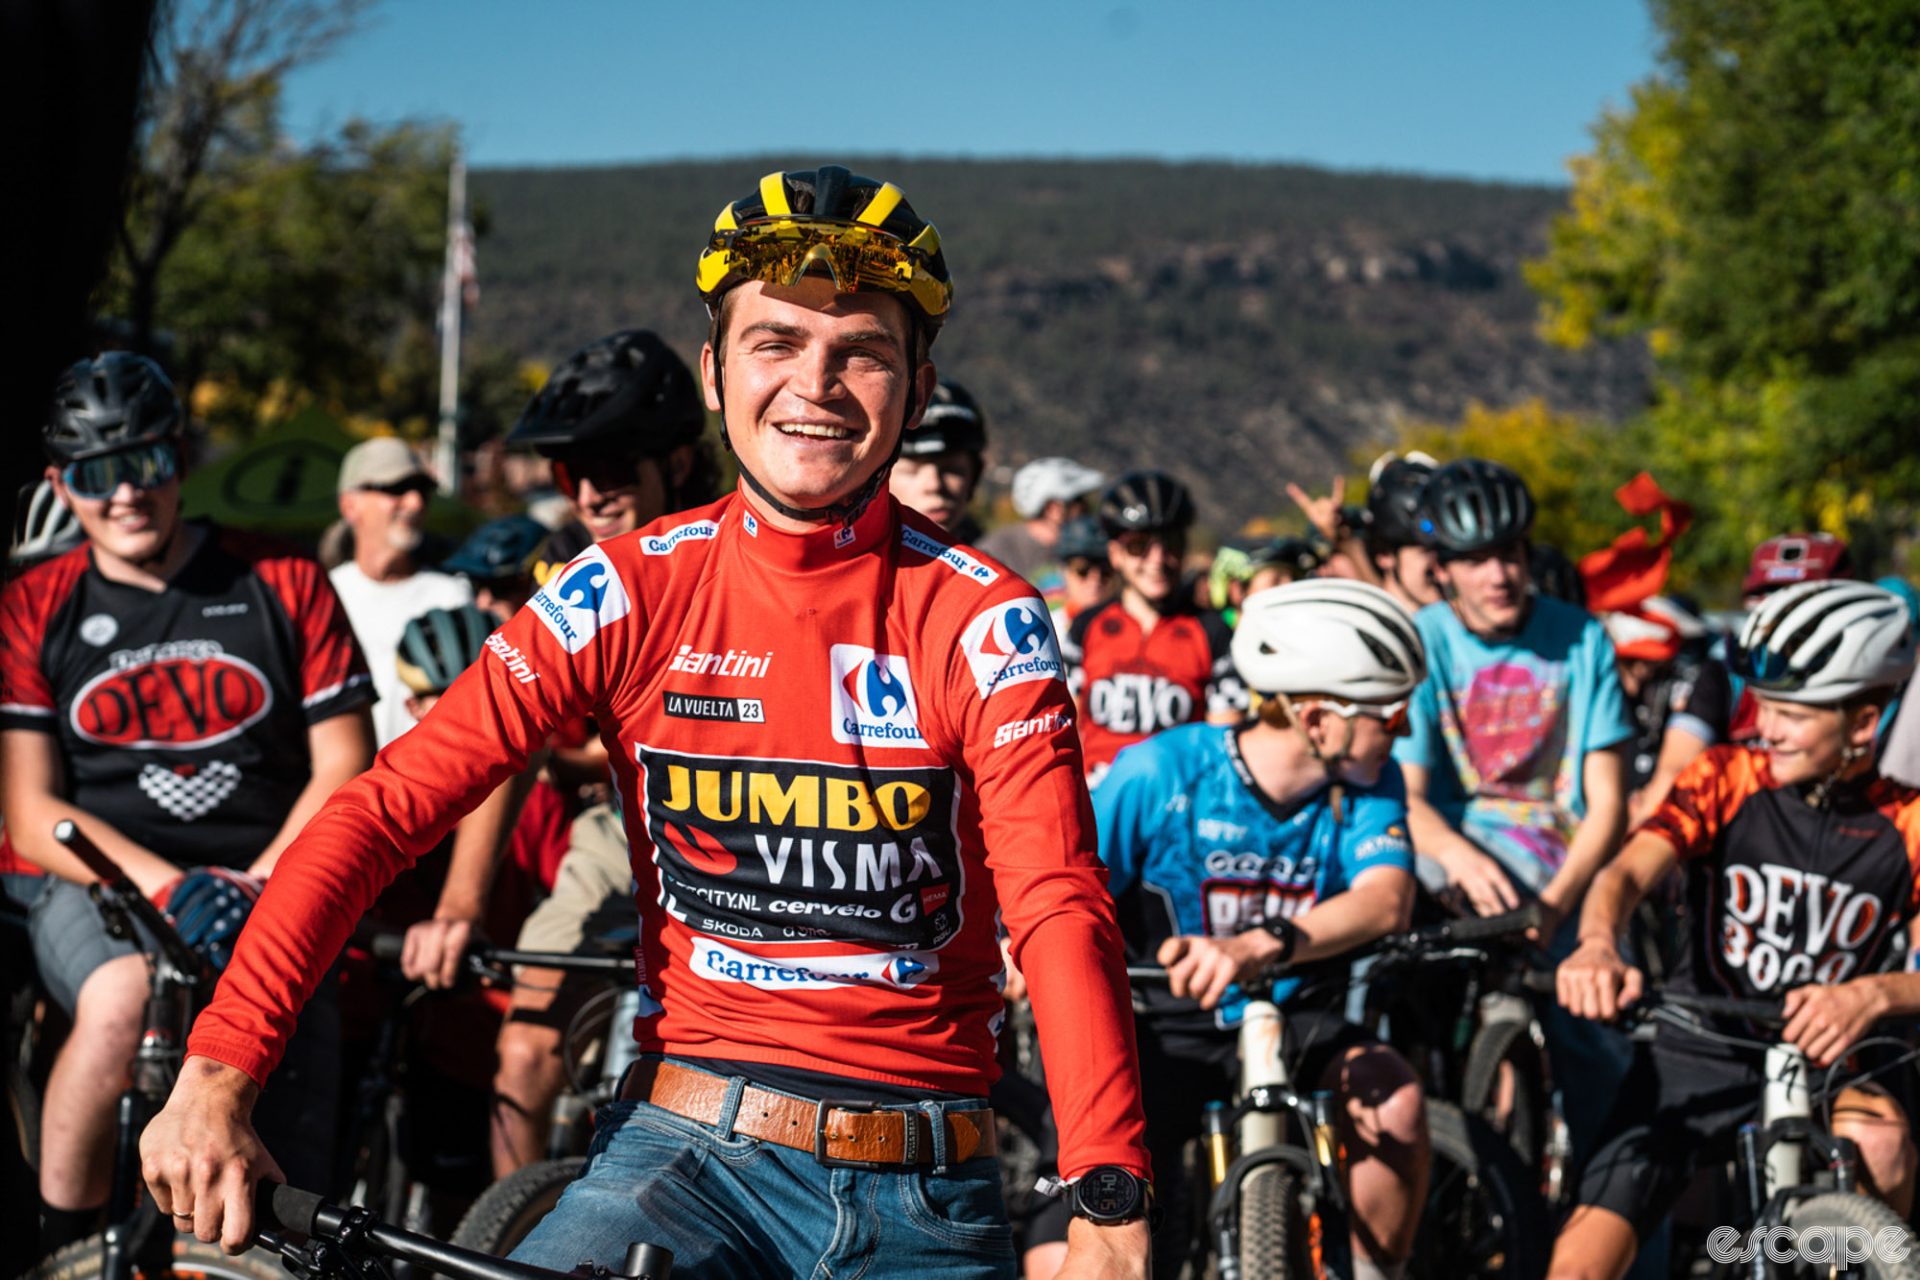 Kuss faces forward now as the ride starts. He's smiling in bright sunlight, while the crowd stretches into the distance behind him.